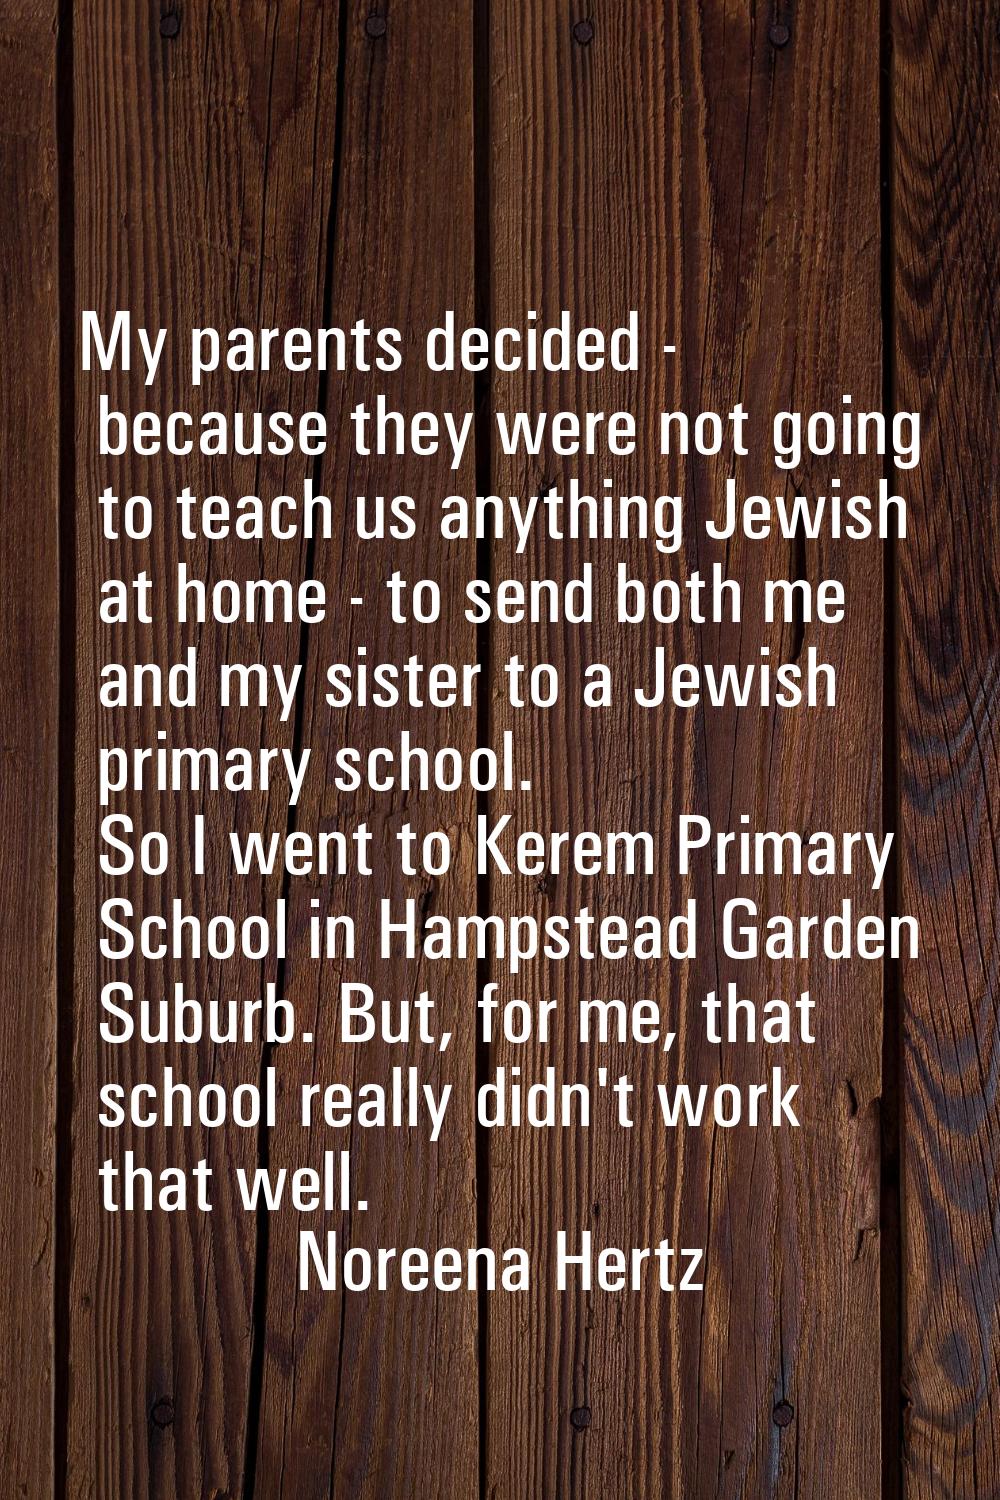 My parents decided - because they were not going to teach us anything Jewish at home - to send both